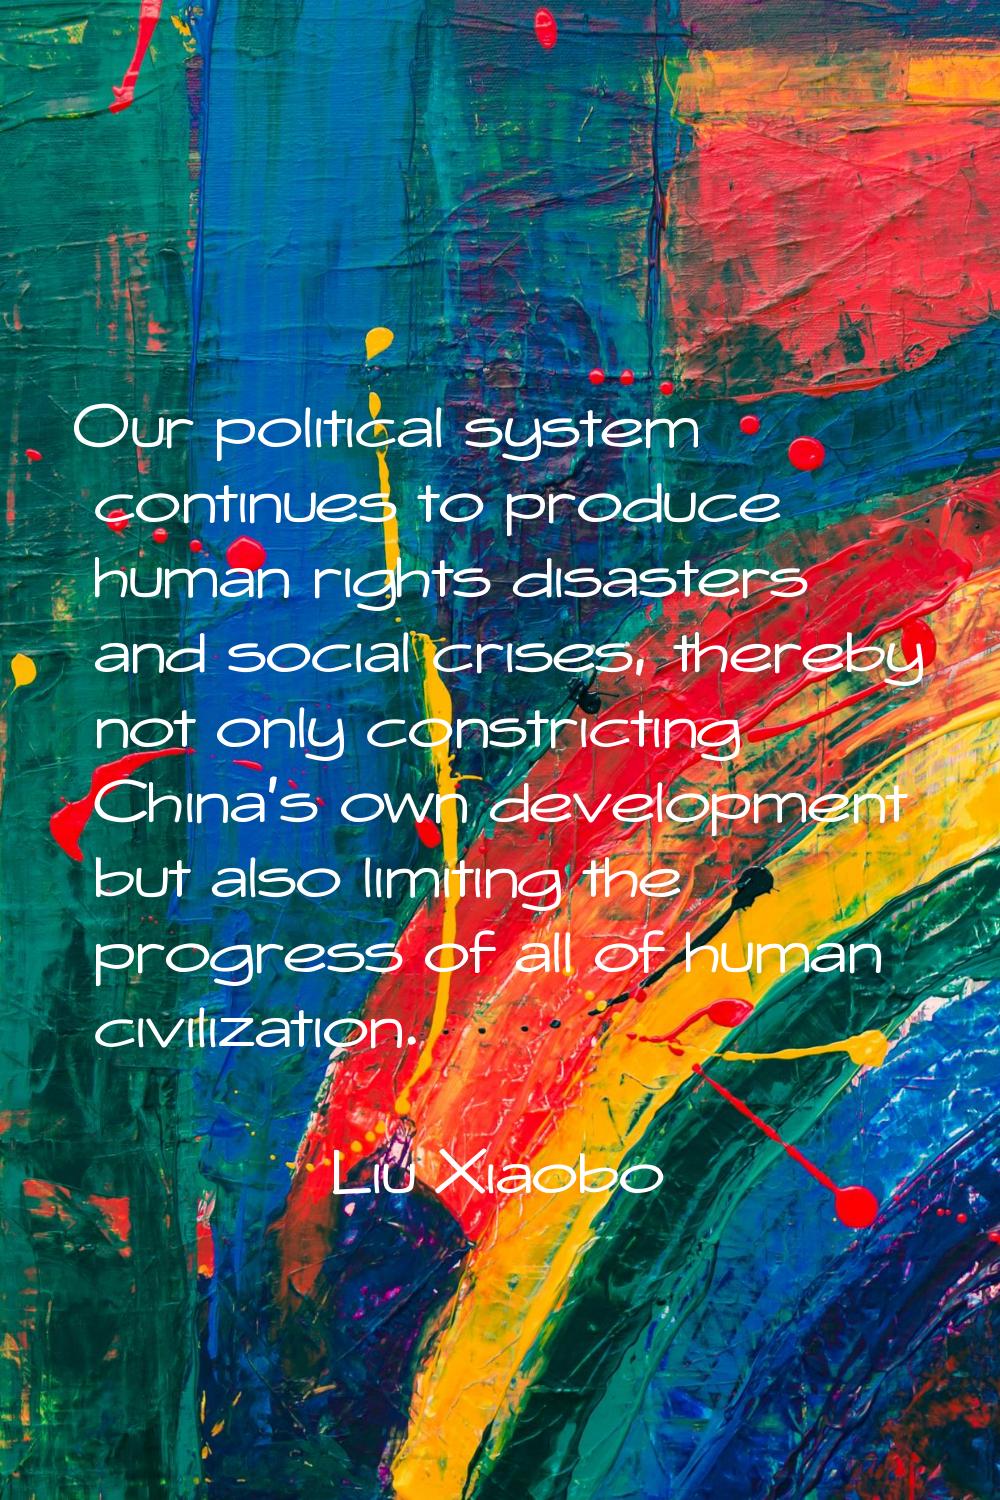 Our political system continues to produce human rights disasters and social crises, thereby not onl